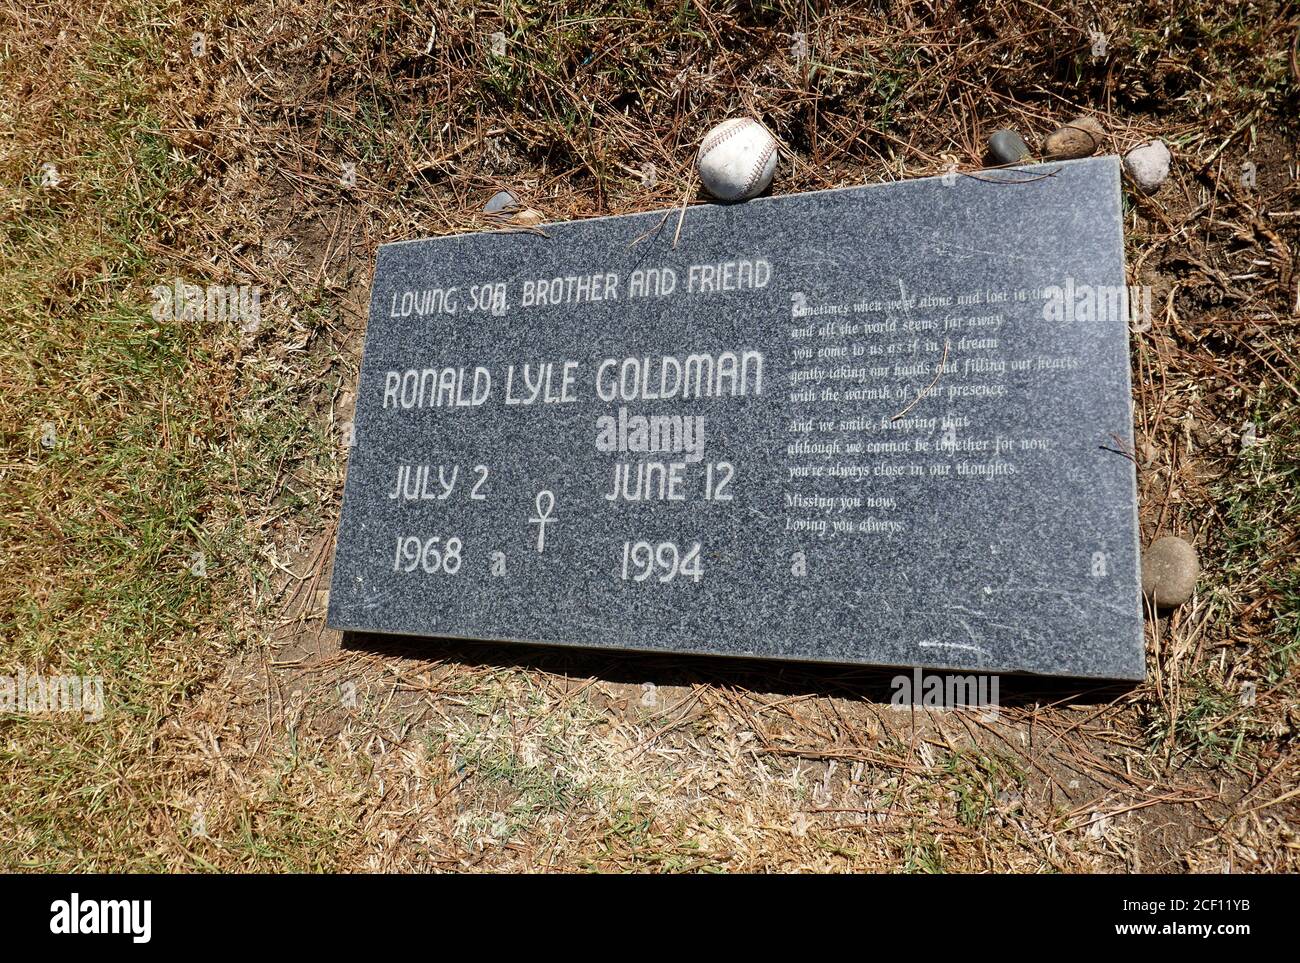 Westlake Village, California, USA 2nd September 2020 A general view of atmosphere Ron Goldman, aka Ronald Lyle Goldman's Grave in Beth Olam Gardens at Pierce Brothers Valley Oaks Memorial Park on September 2, 2020 in Westlake Village, California, USA. Photo by Barry King/Alamy Stock Photo Stock Photo